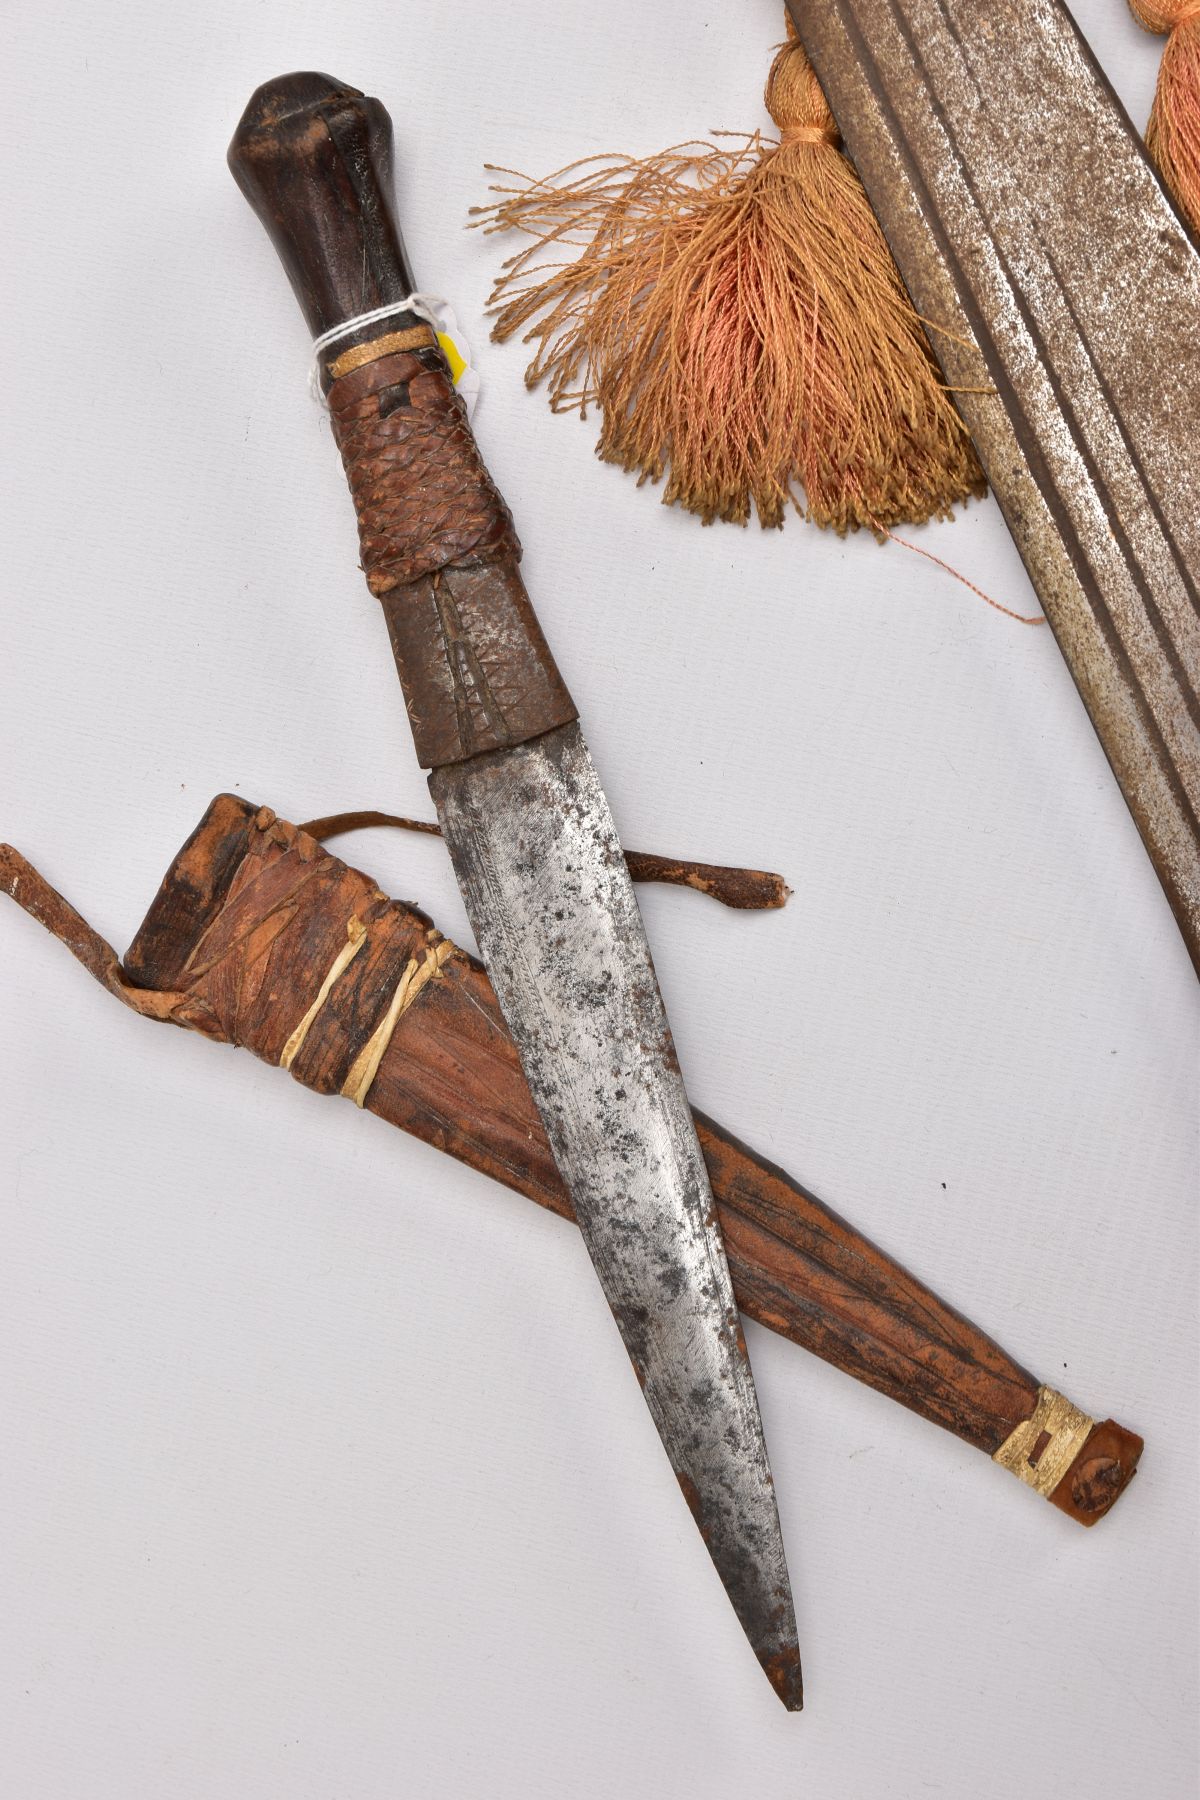 FIVE ASSORTED BLADED WEAPONS, two small short swords, curved blades, poorly constructed, knots in - Image 8 of 14